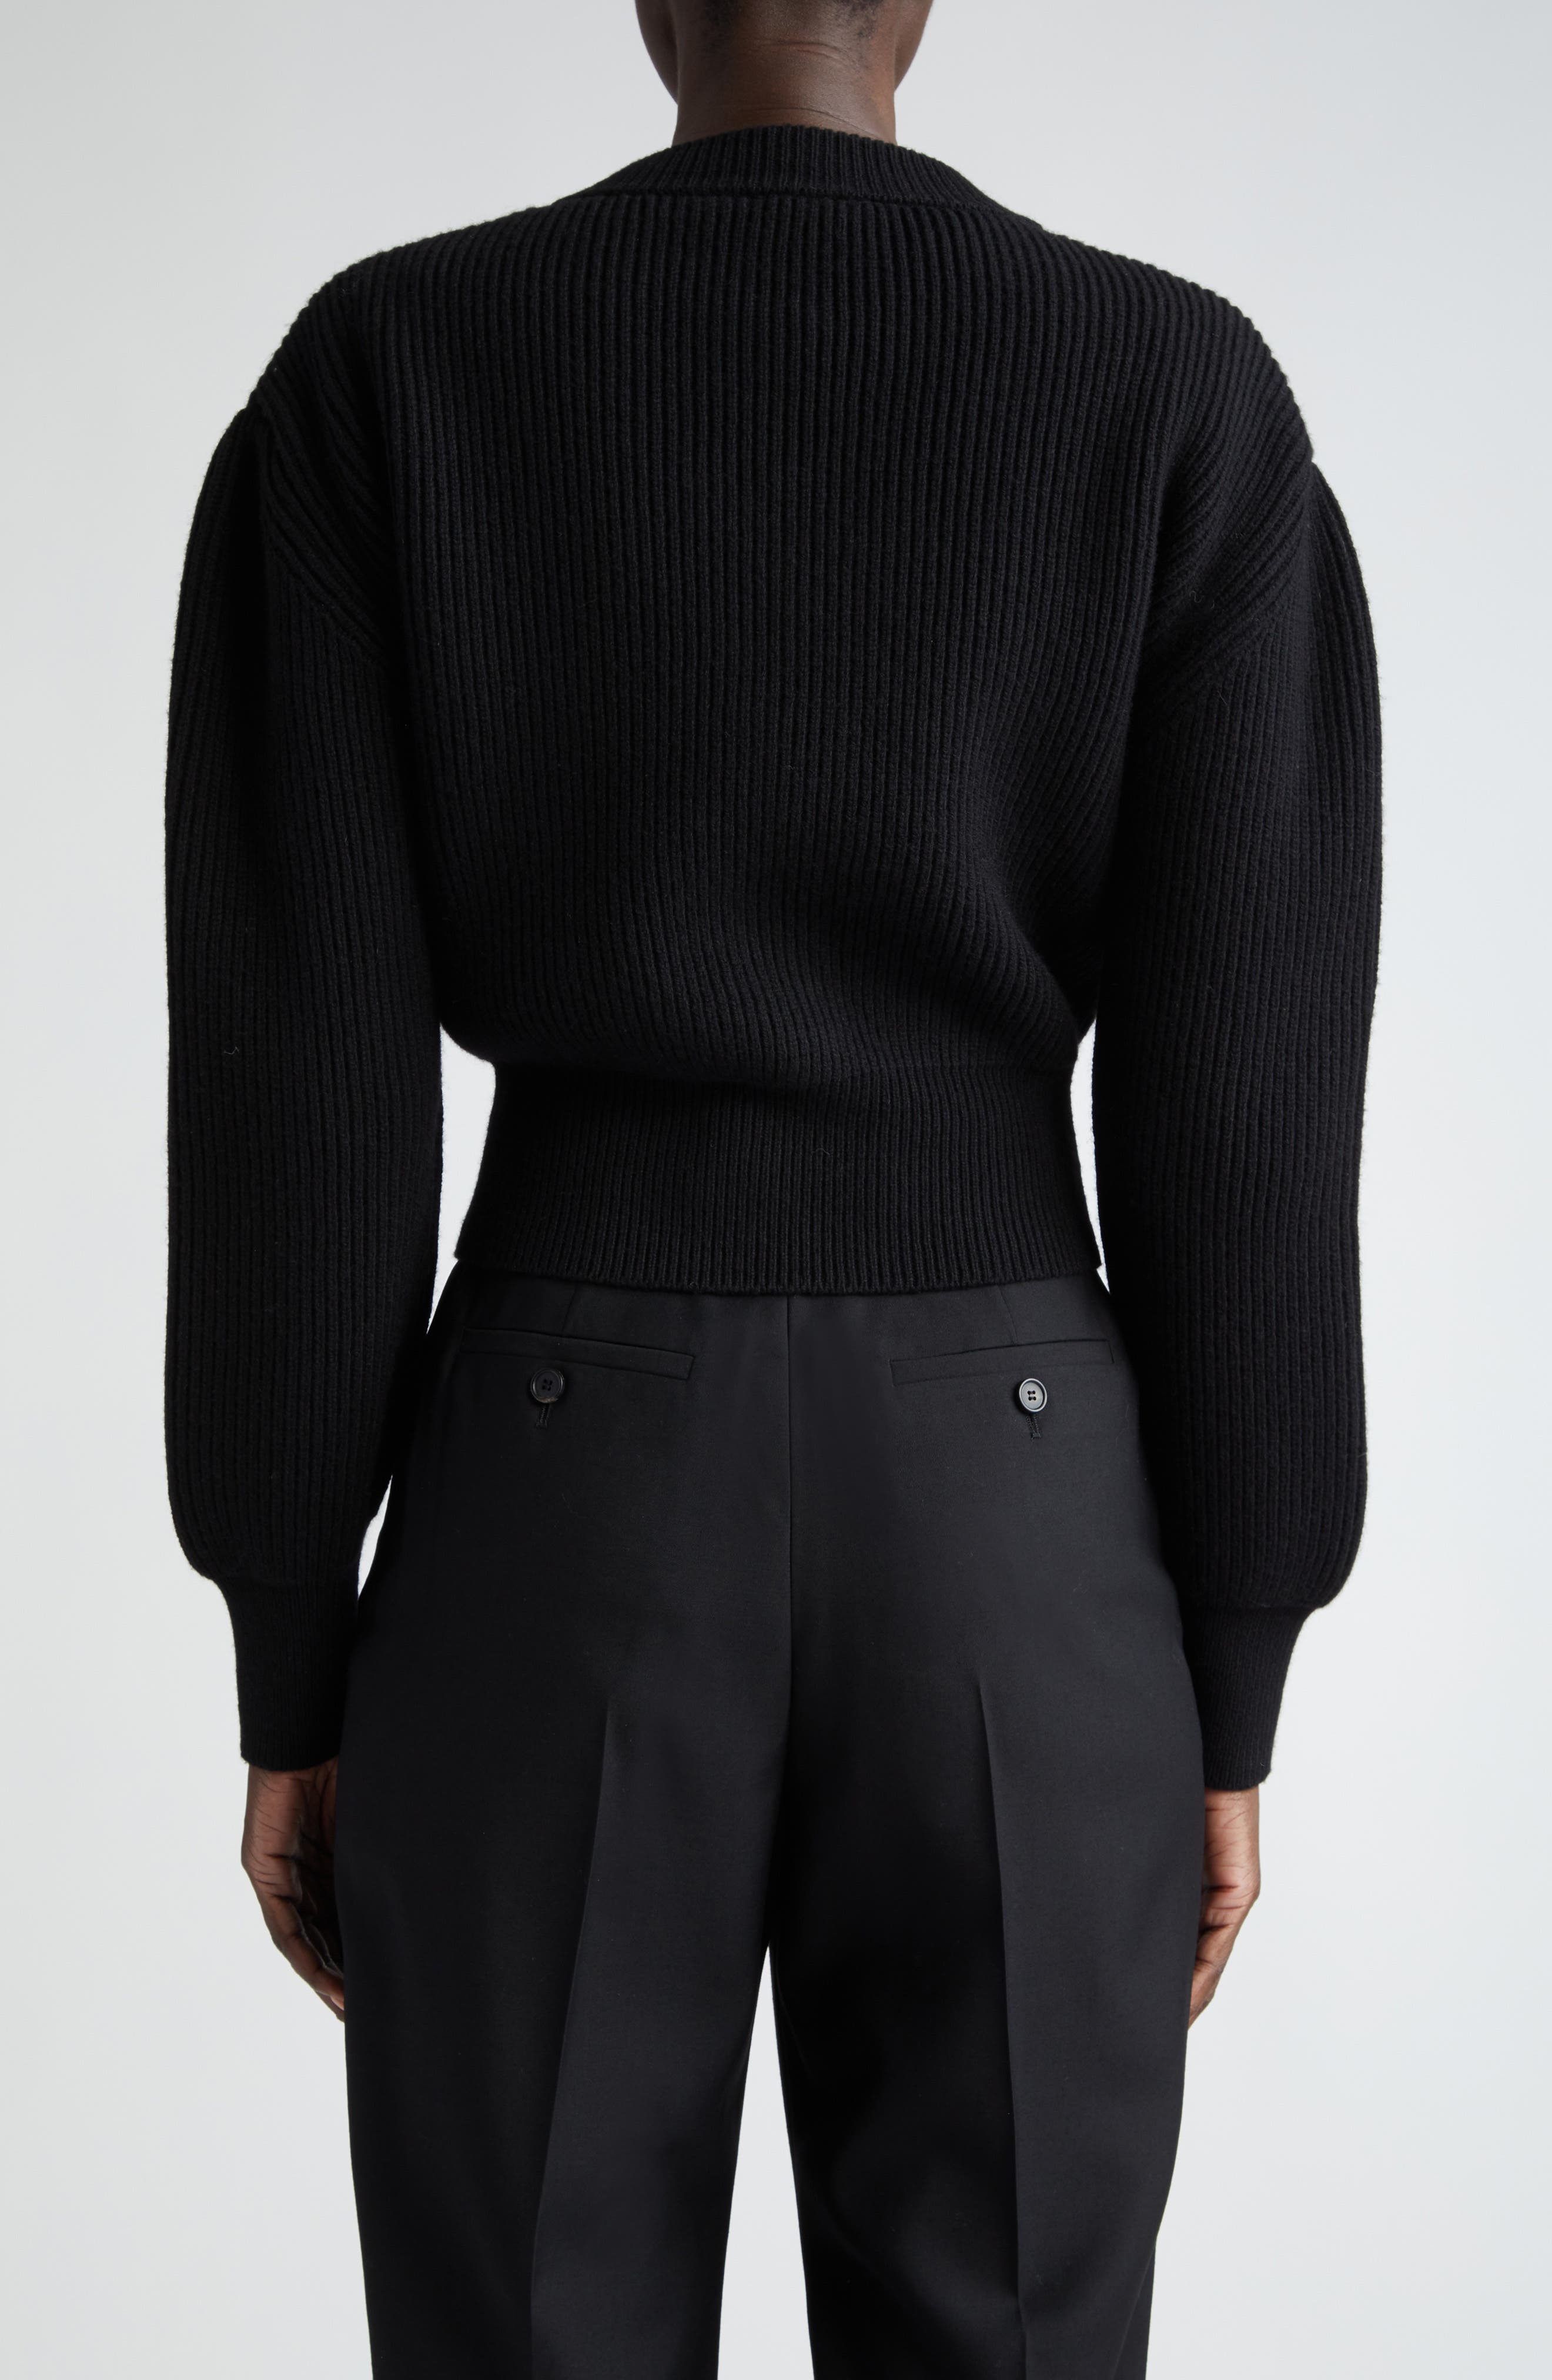 Alexander McQueen cut-out cocoon turtleneck - White